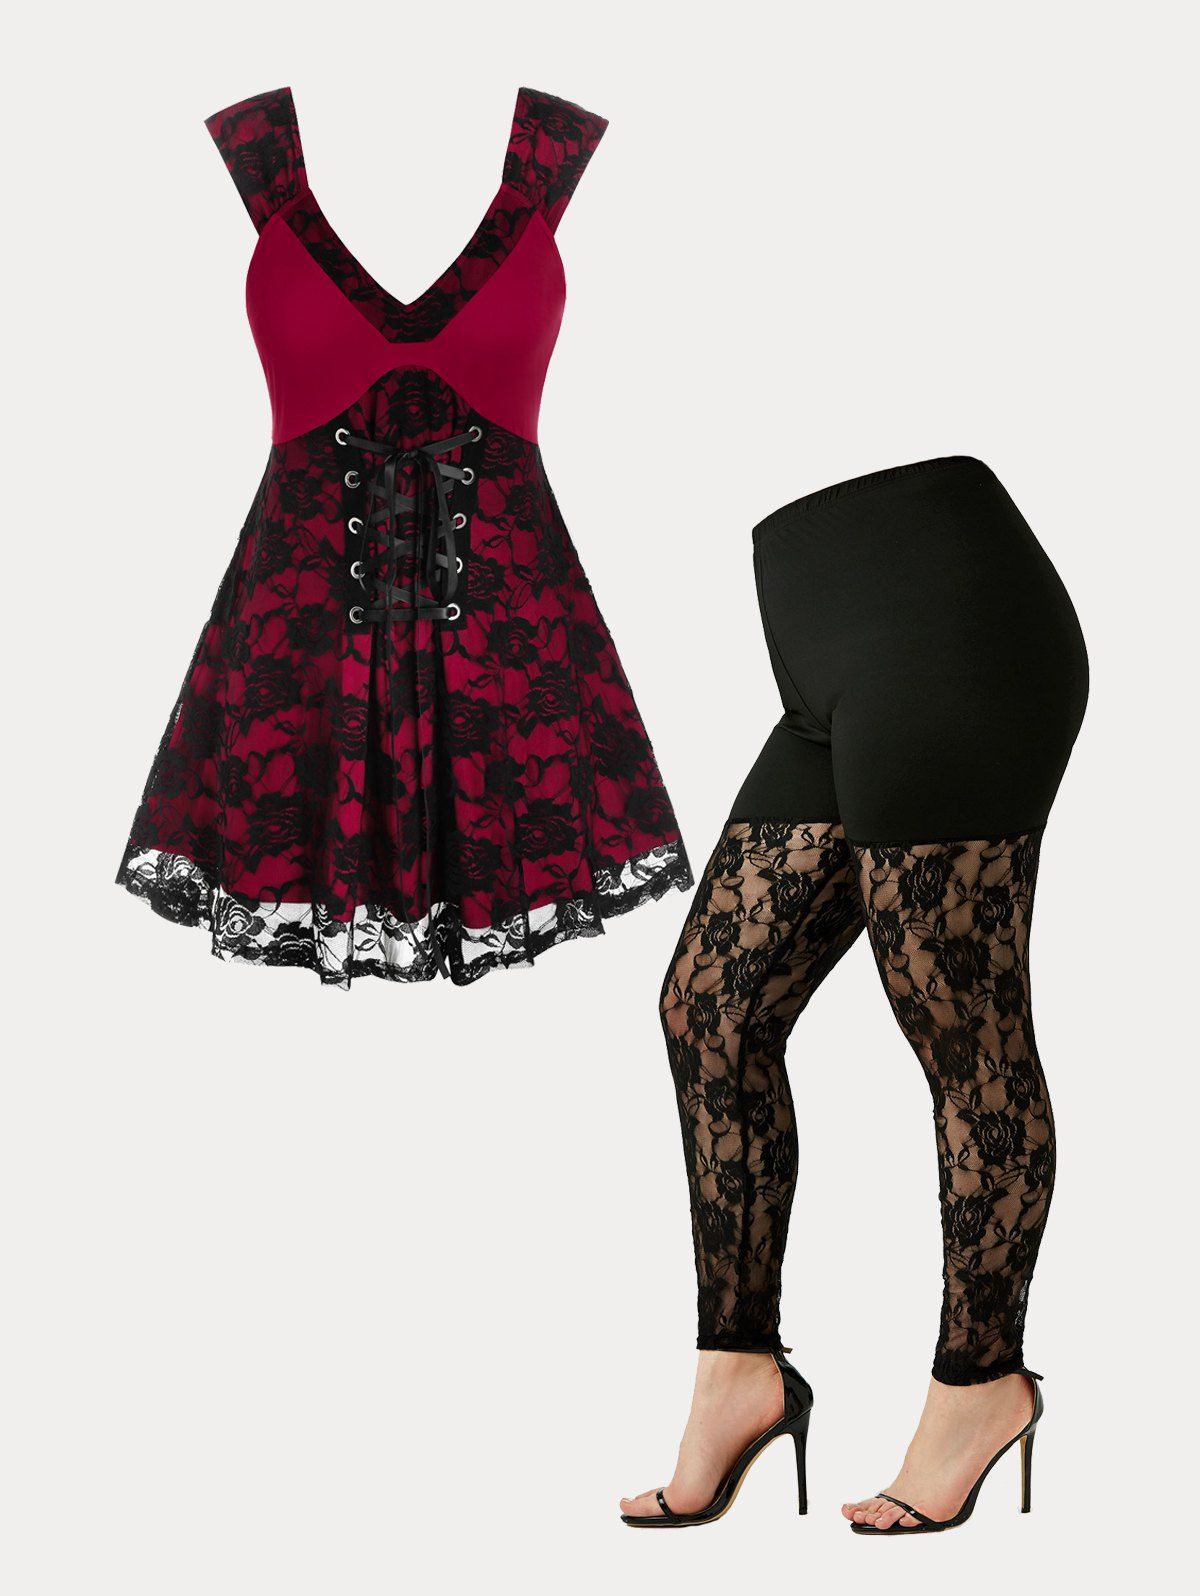 Best Lavish in Lace Plus Size Summer Outfit  